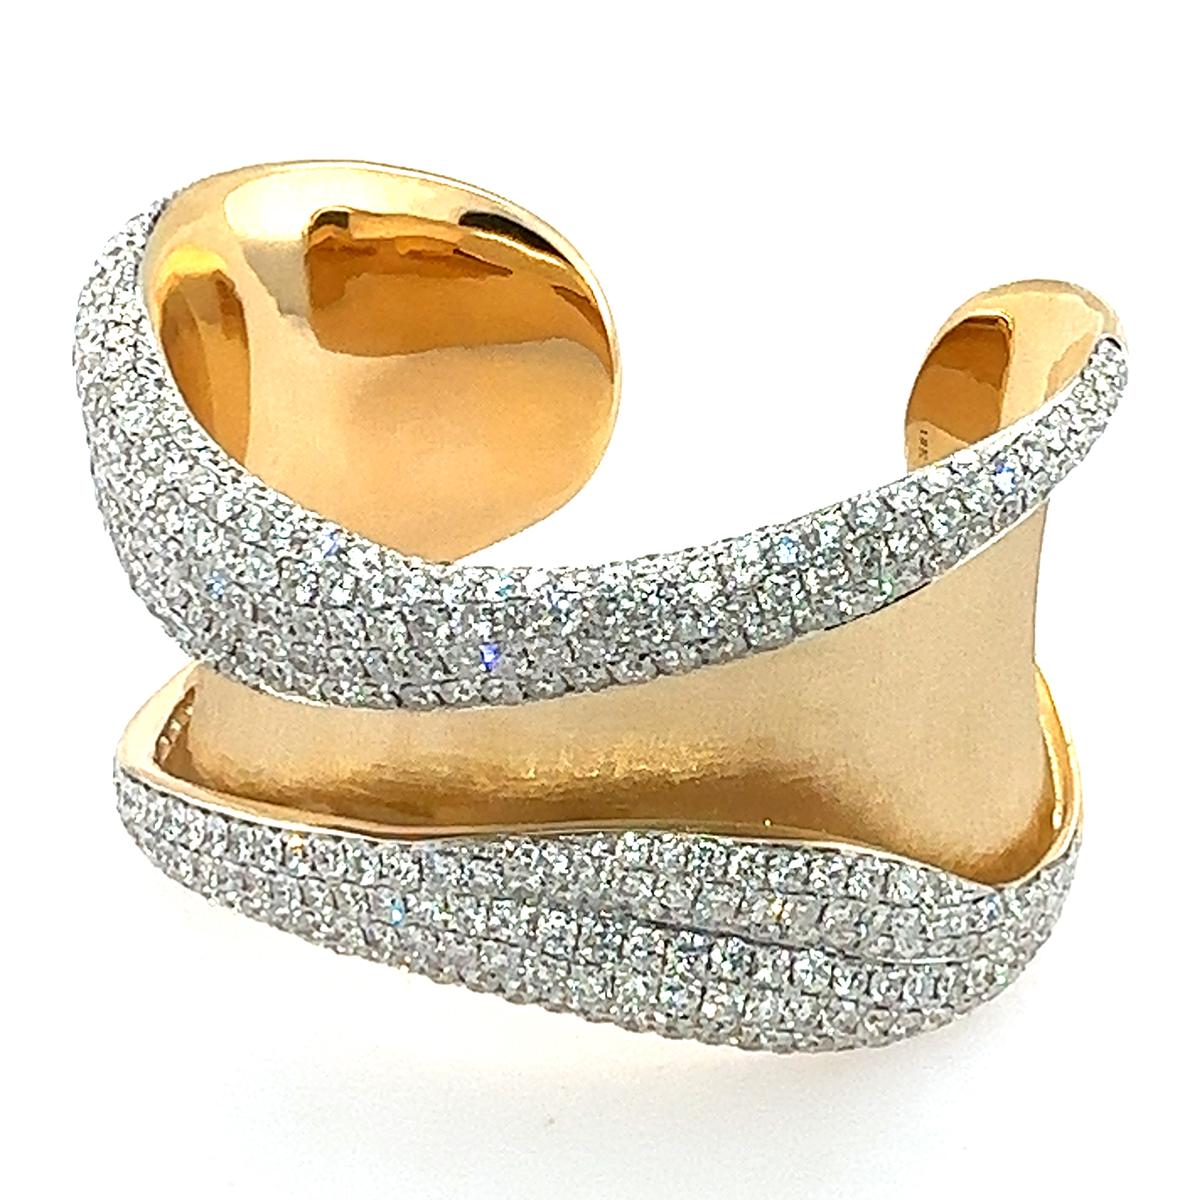 Stunning 18k satin finished cuff bracelet with 422 pave set collection color/clarity, natural round brilliant diamonds weighing 19.01 carats and 102.36 grams of 18k gold.